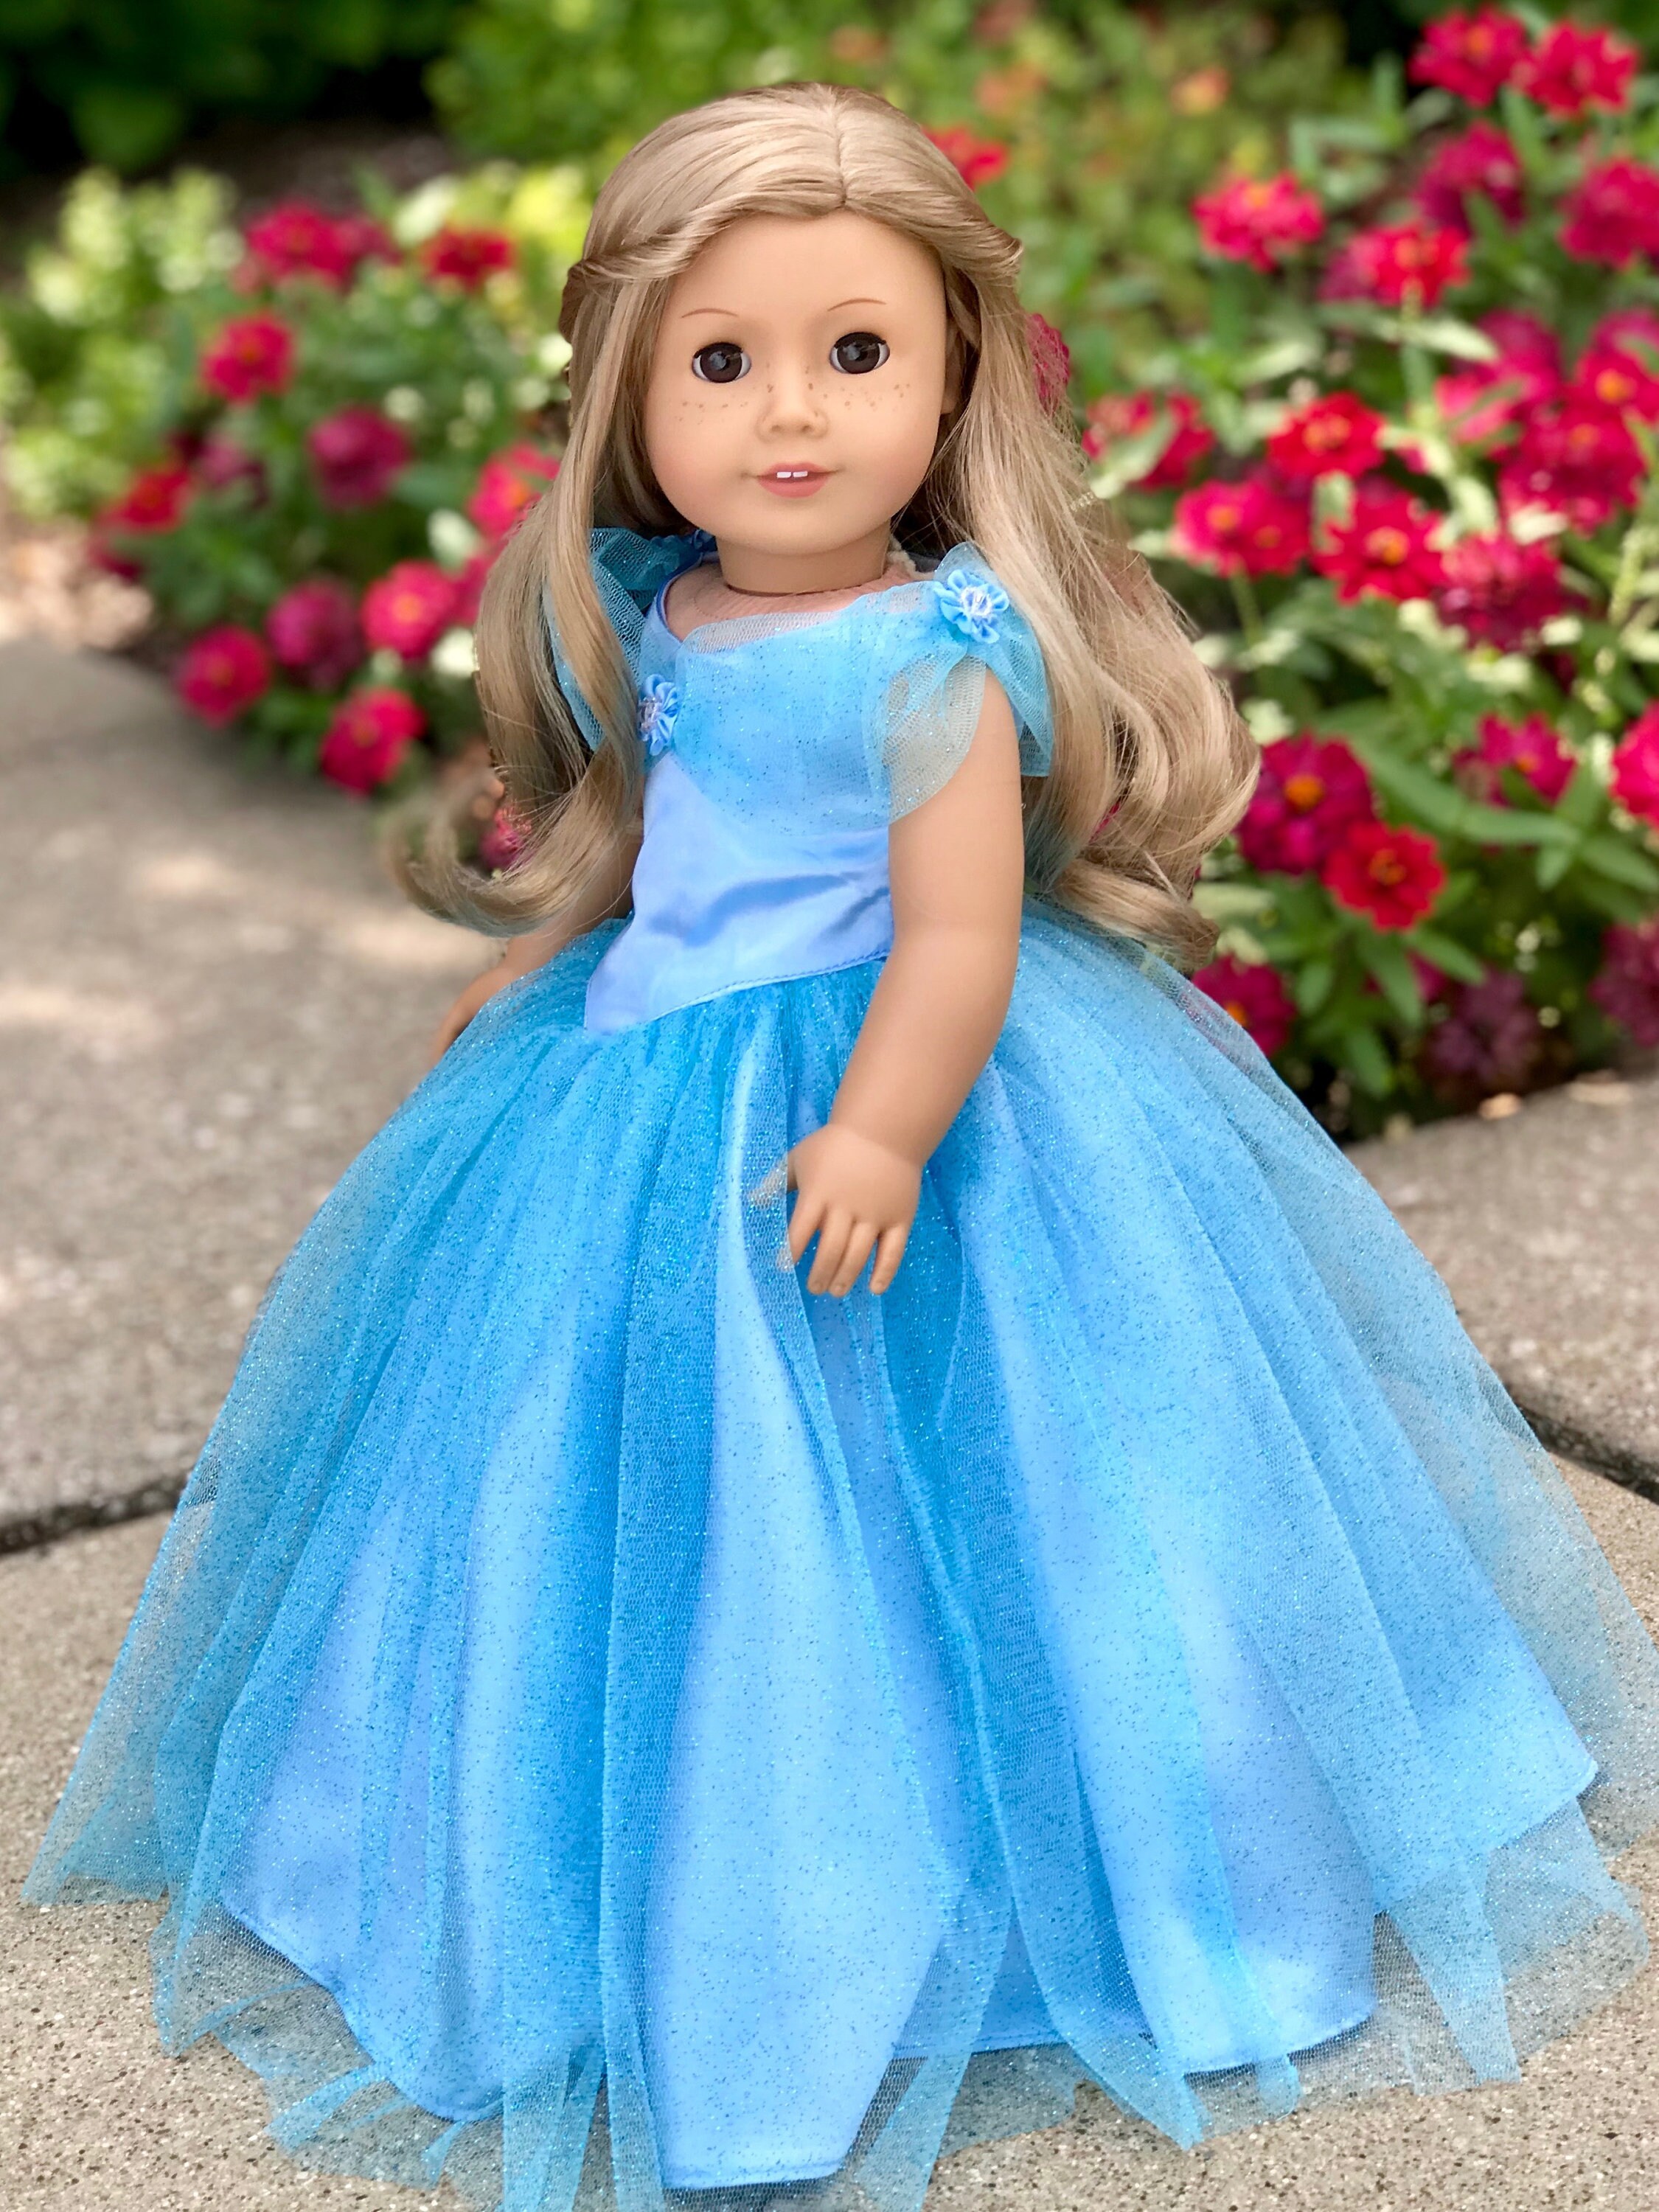 Cinderella dress inspired by Disney's movie for American girl 18" Doll Clothes